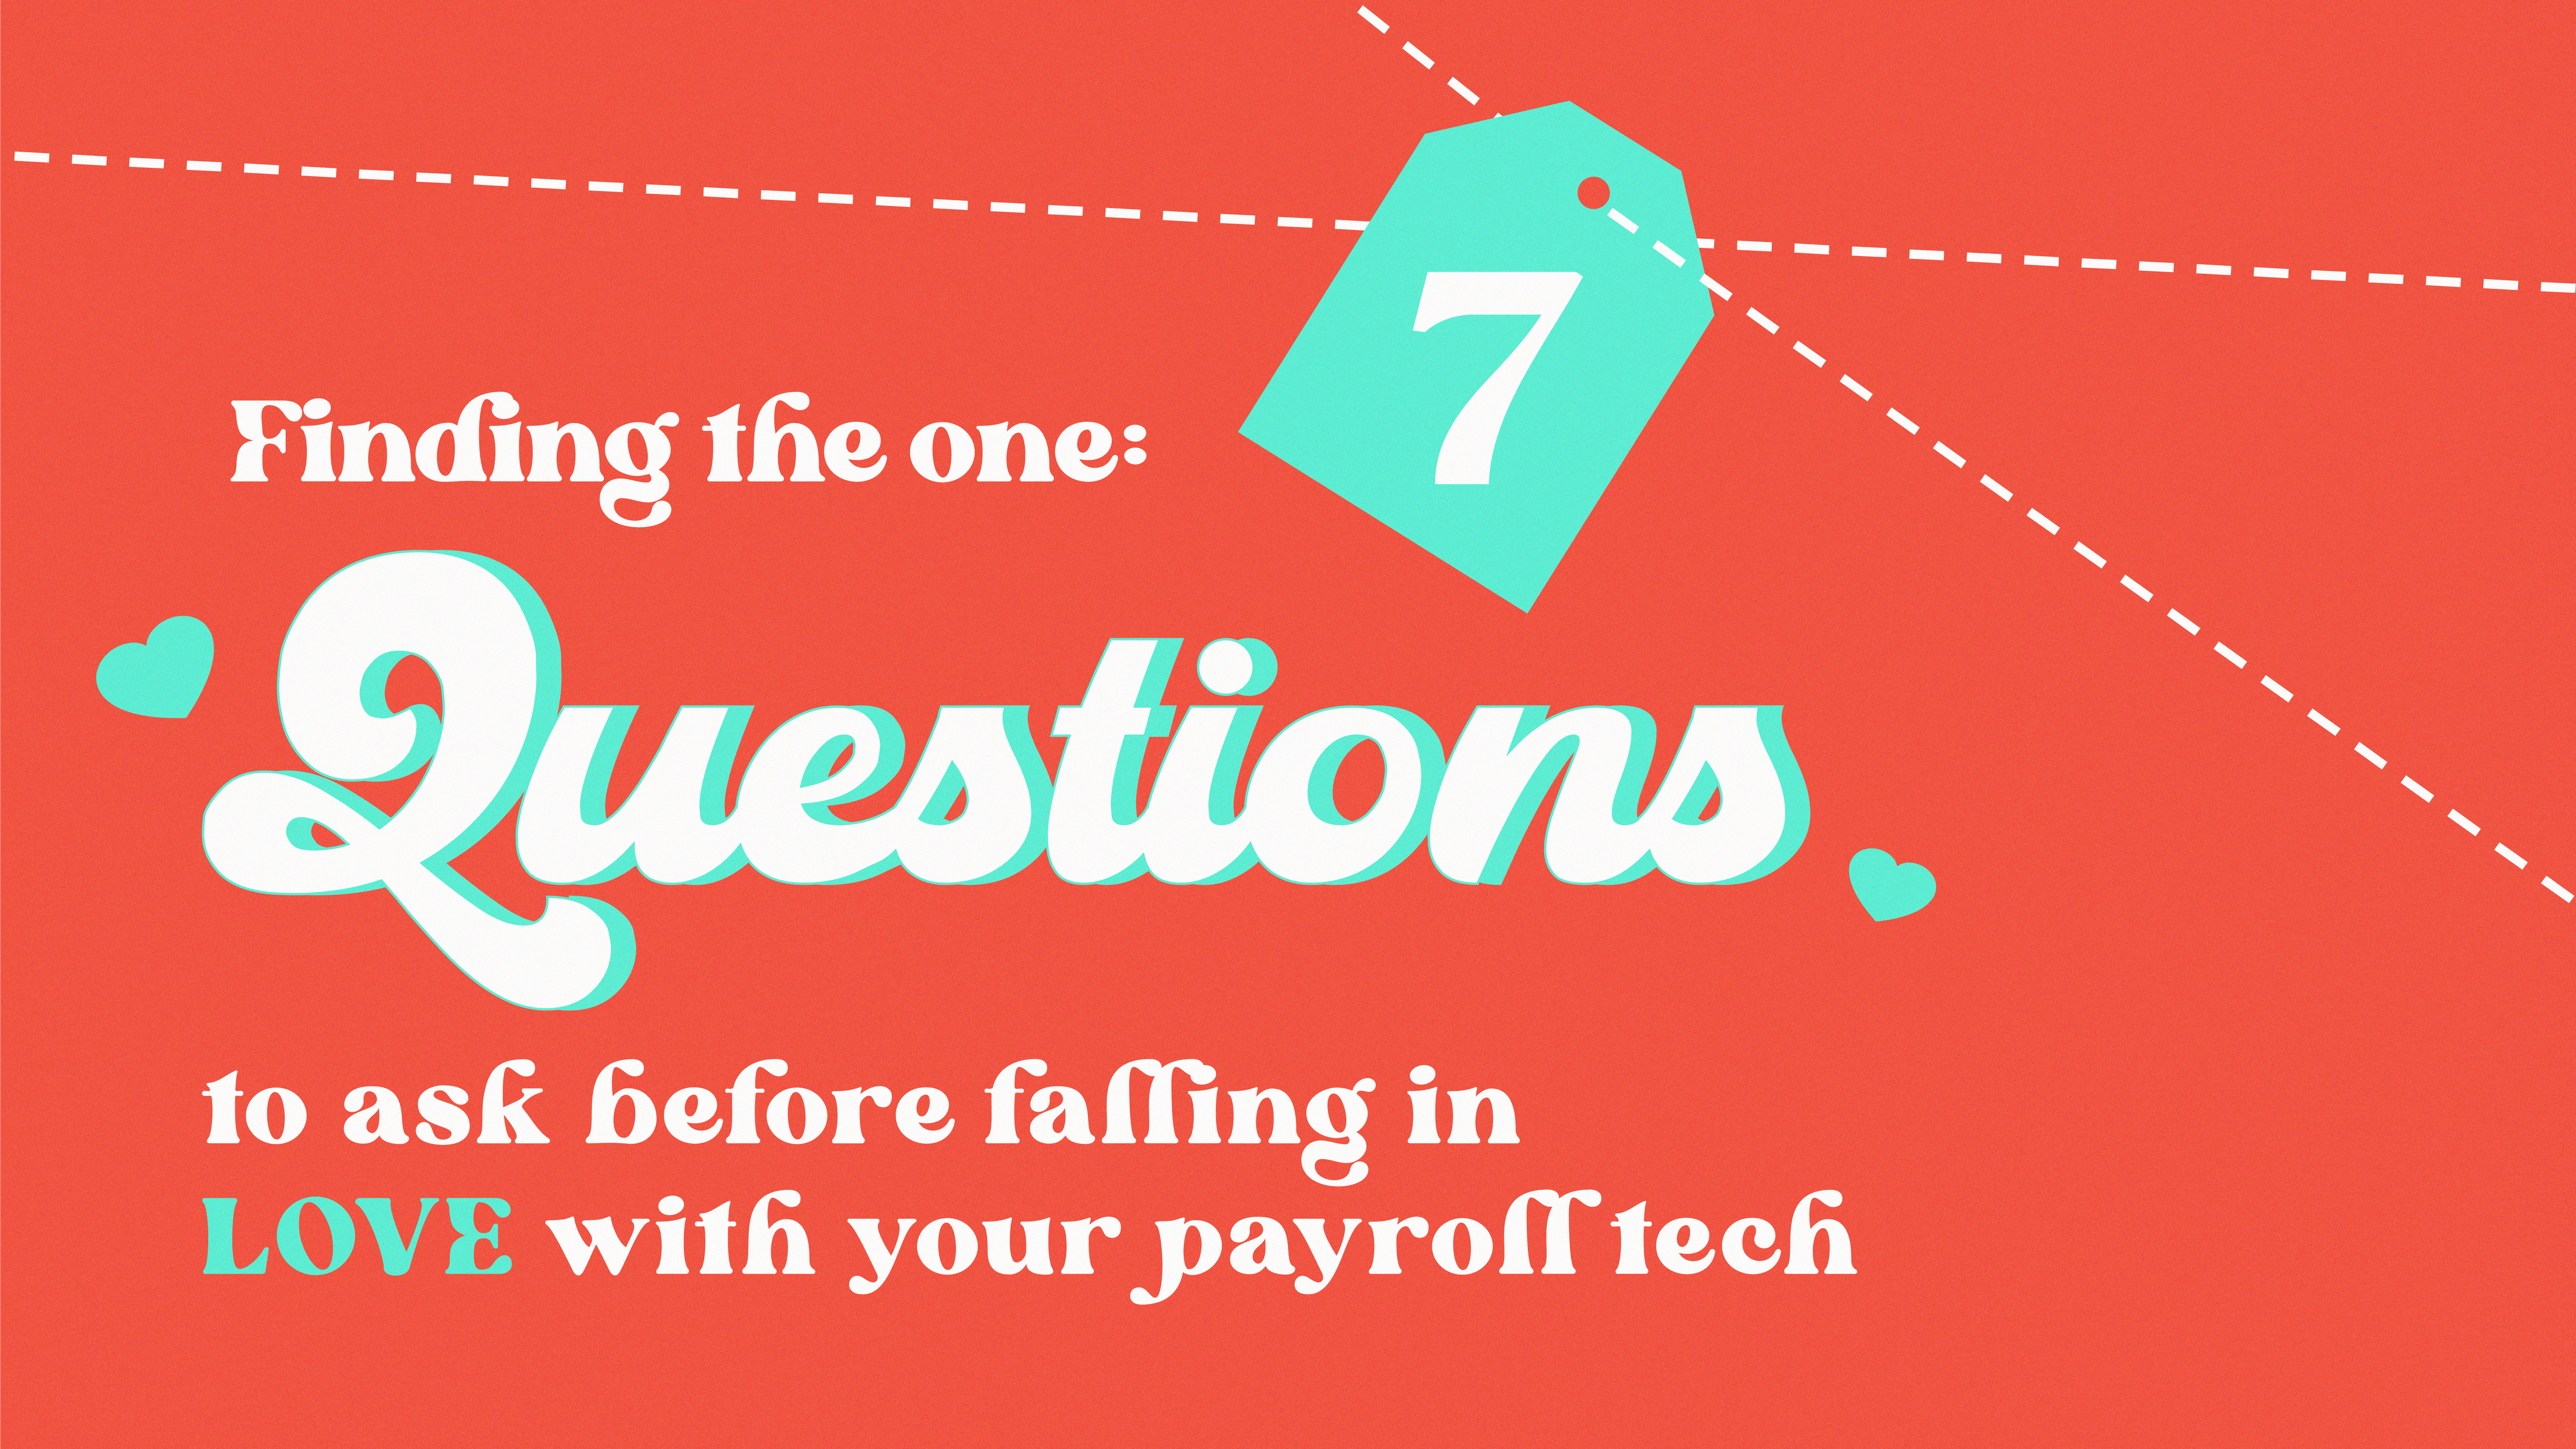 Finding The One: 7 Questions To Ask Your Payroll Tech